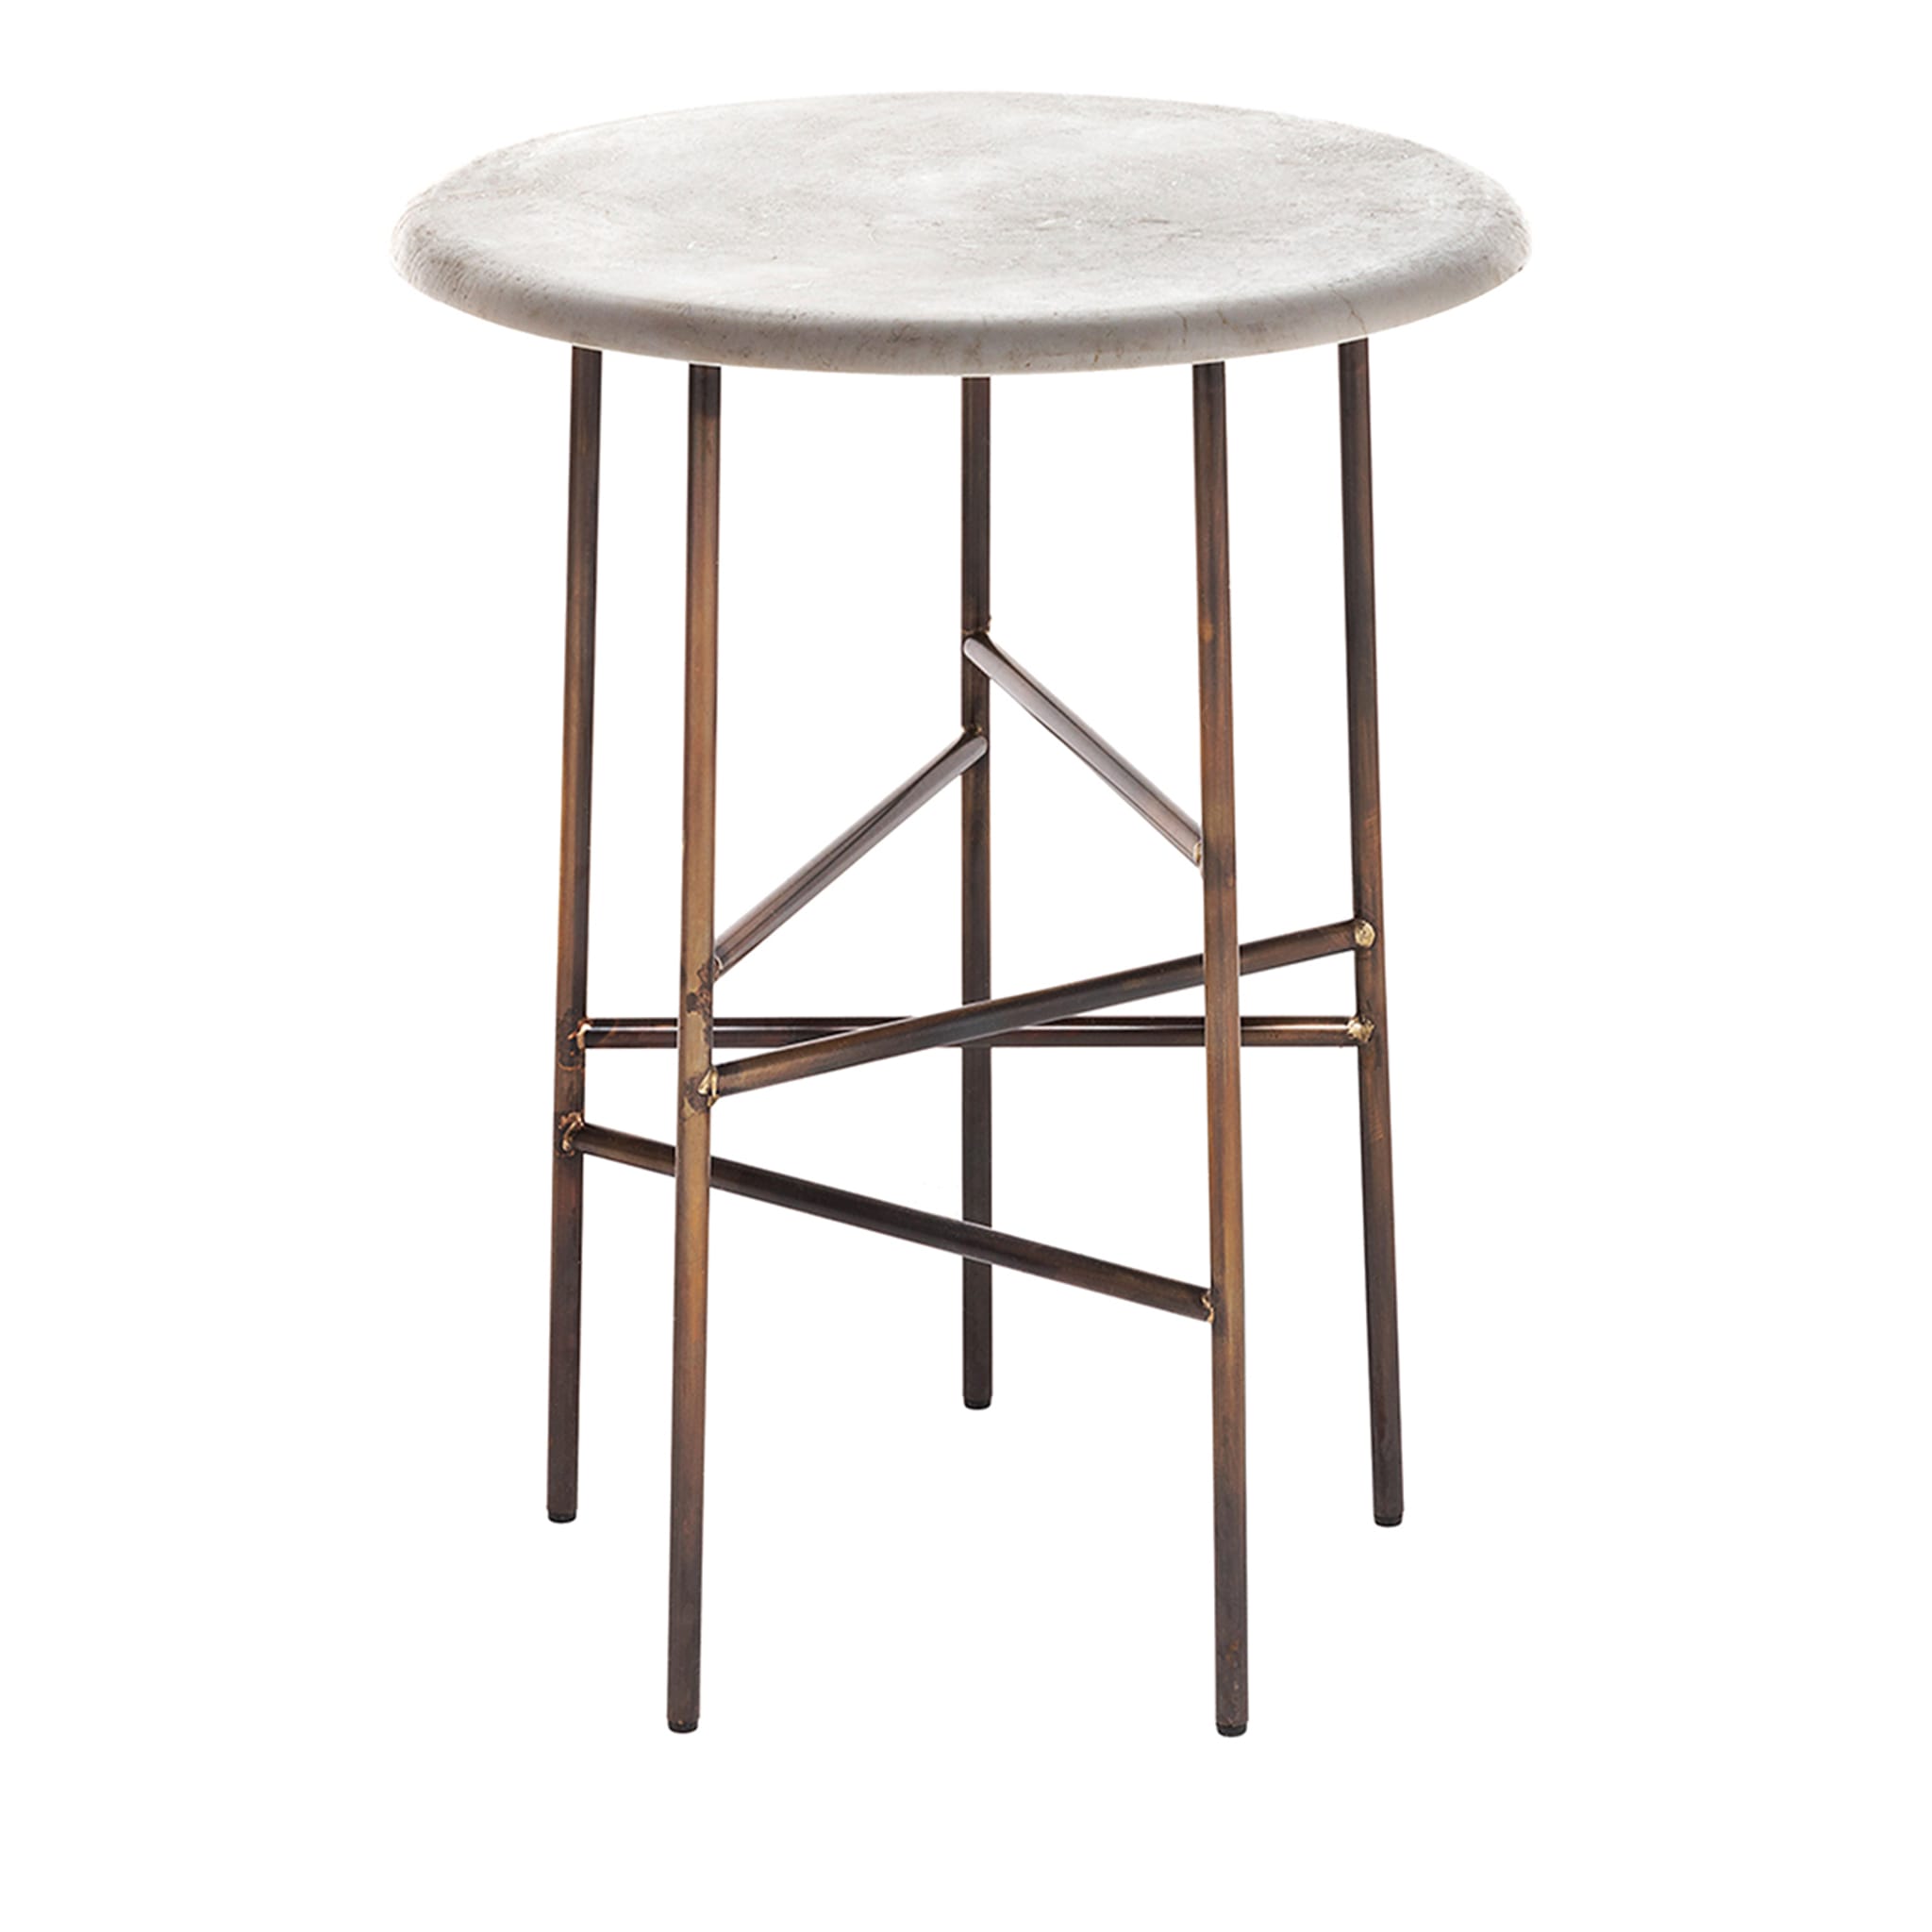 10th Star White Side Table 40 by Massimo Castagna - Main view